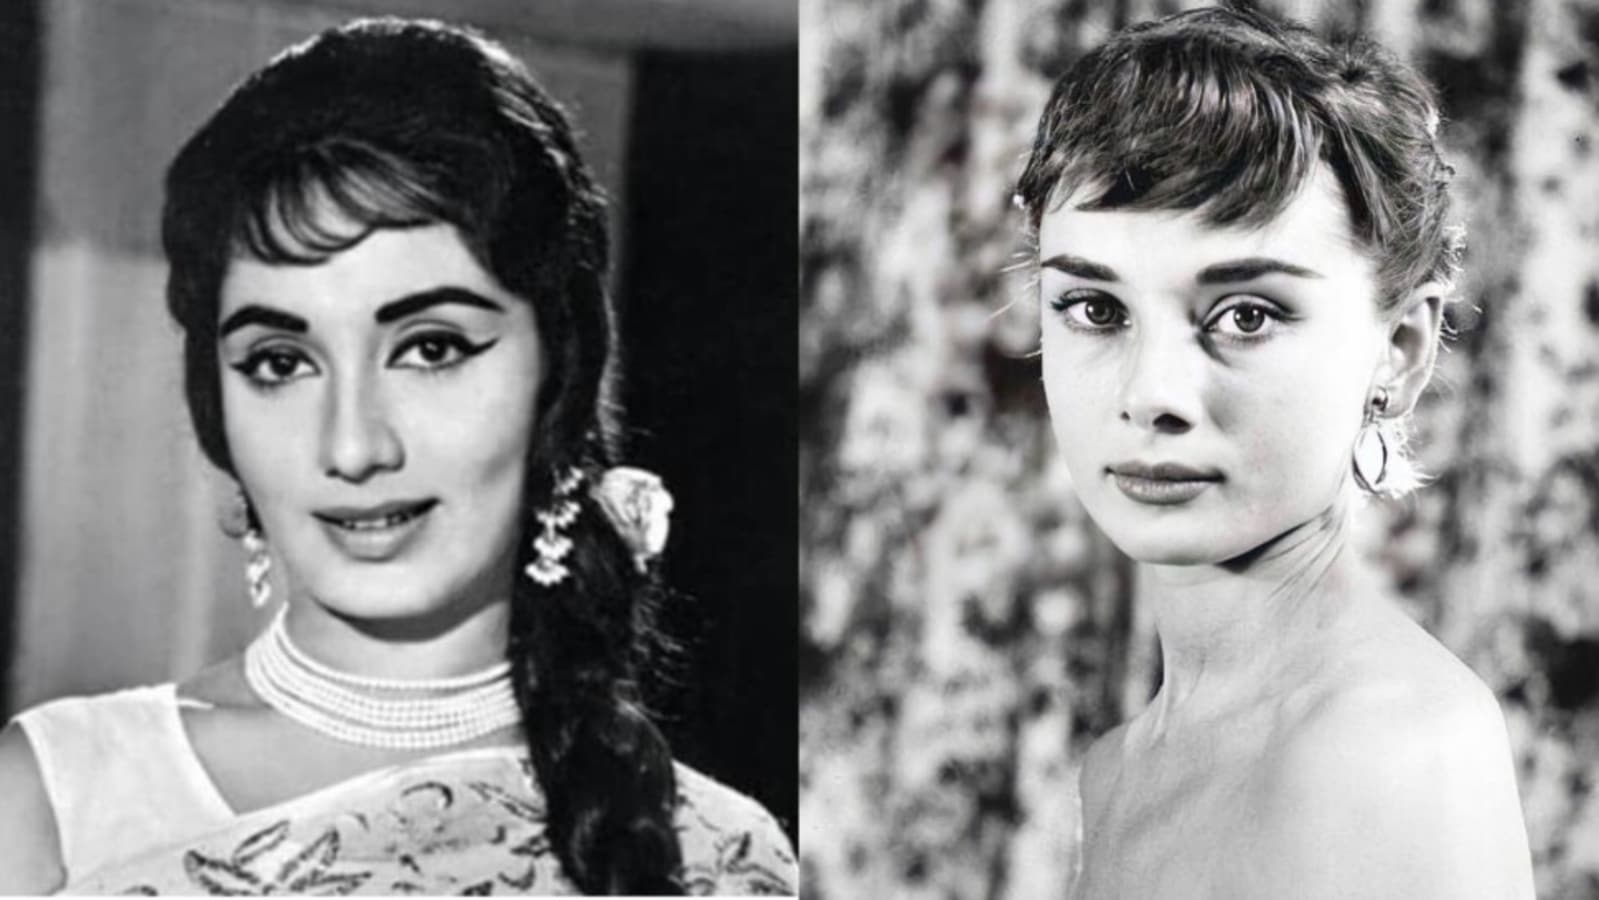 From Sharmila Tagore's bouffant to Kajol's bob cut, trendsetting hairstyles  in Bollywood cinema over the years